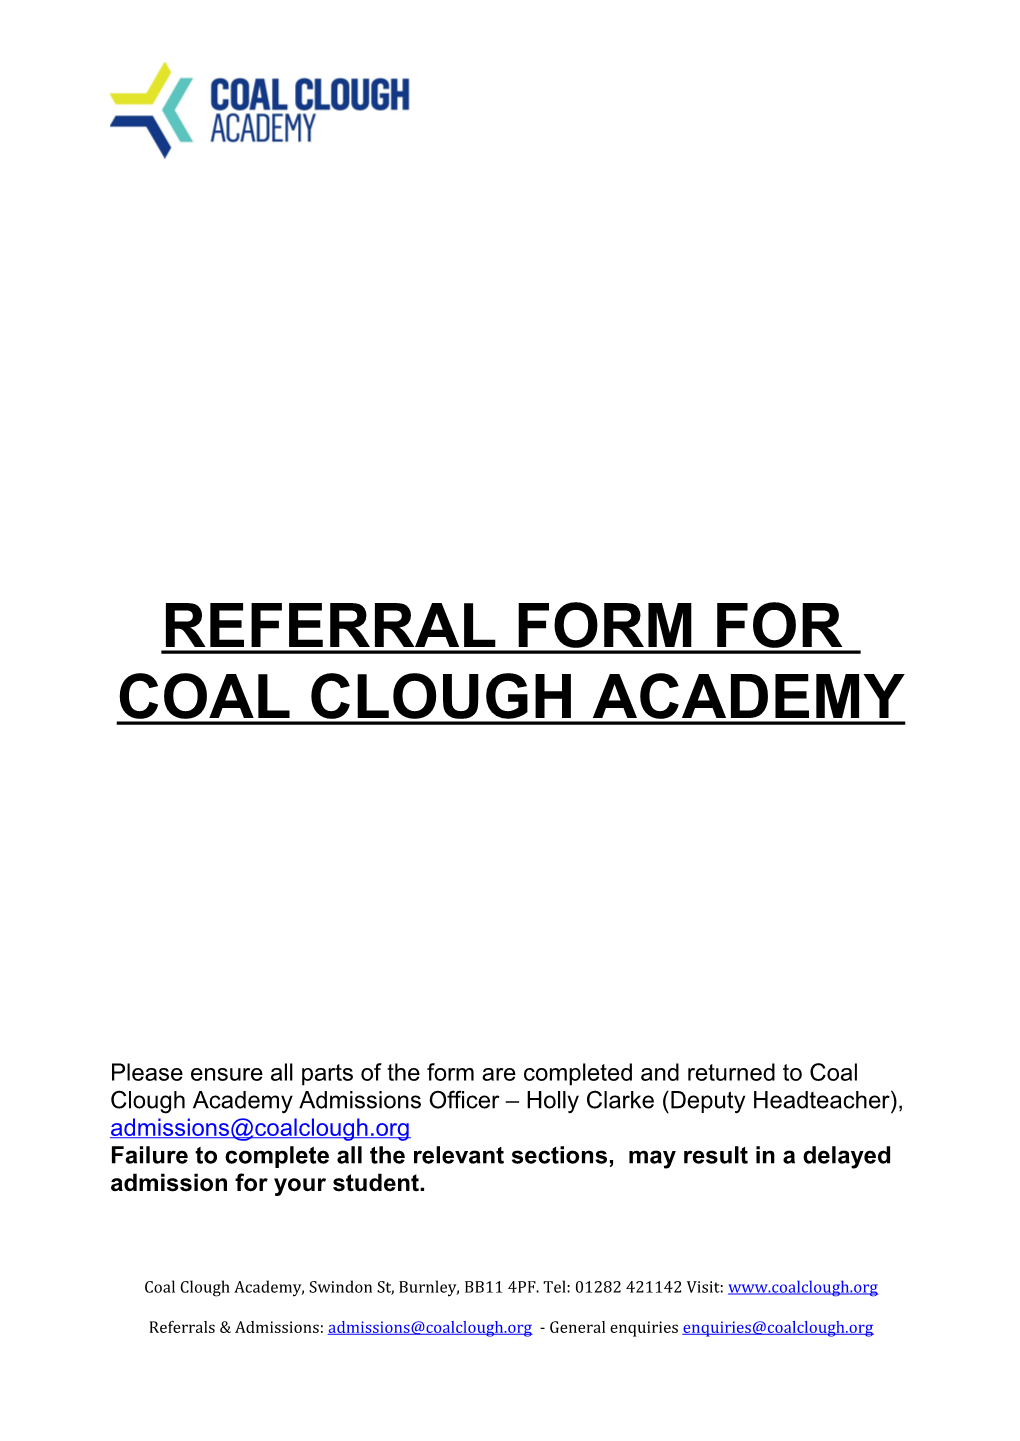 Referral Form For